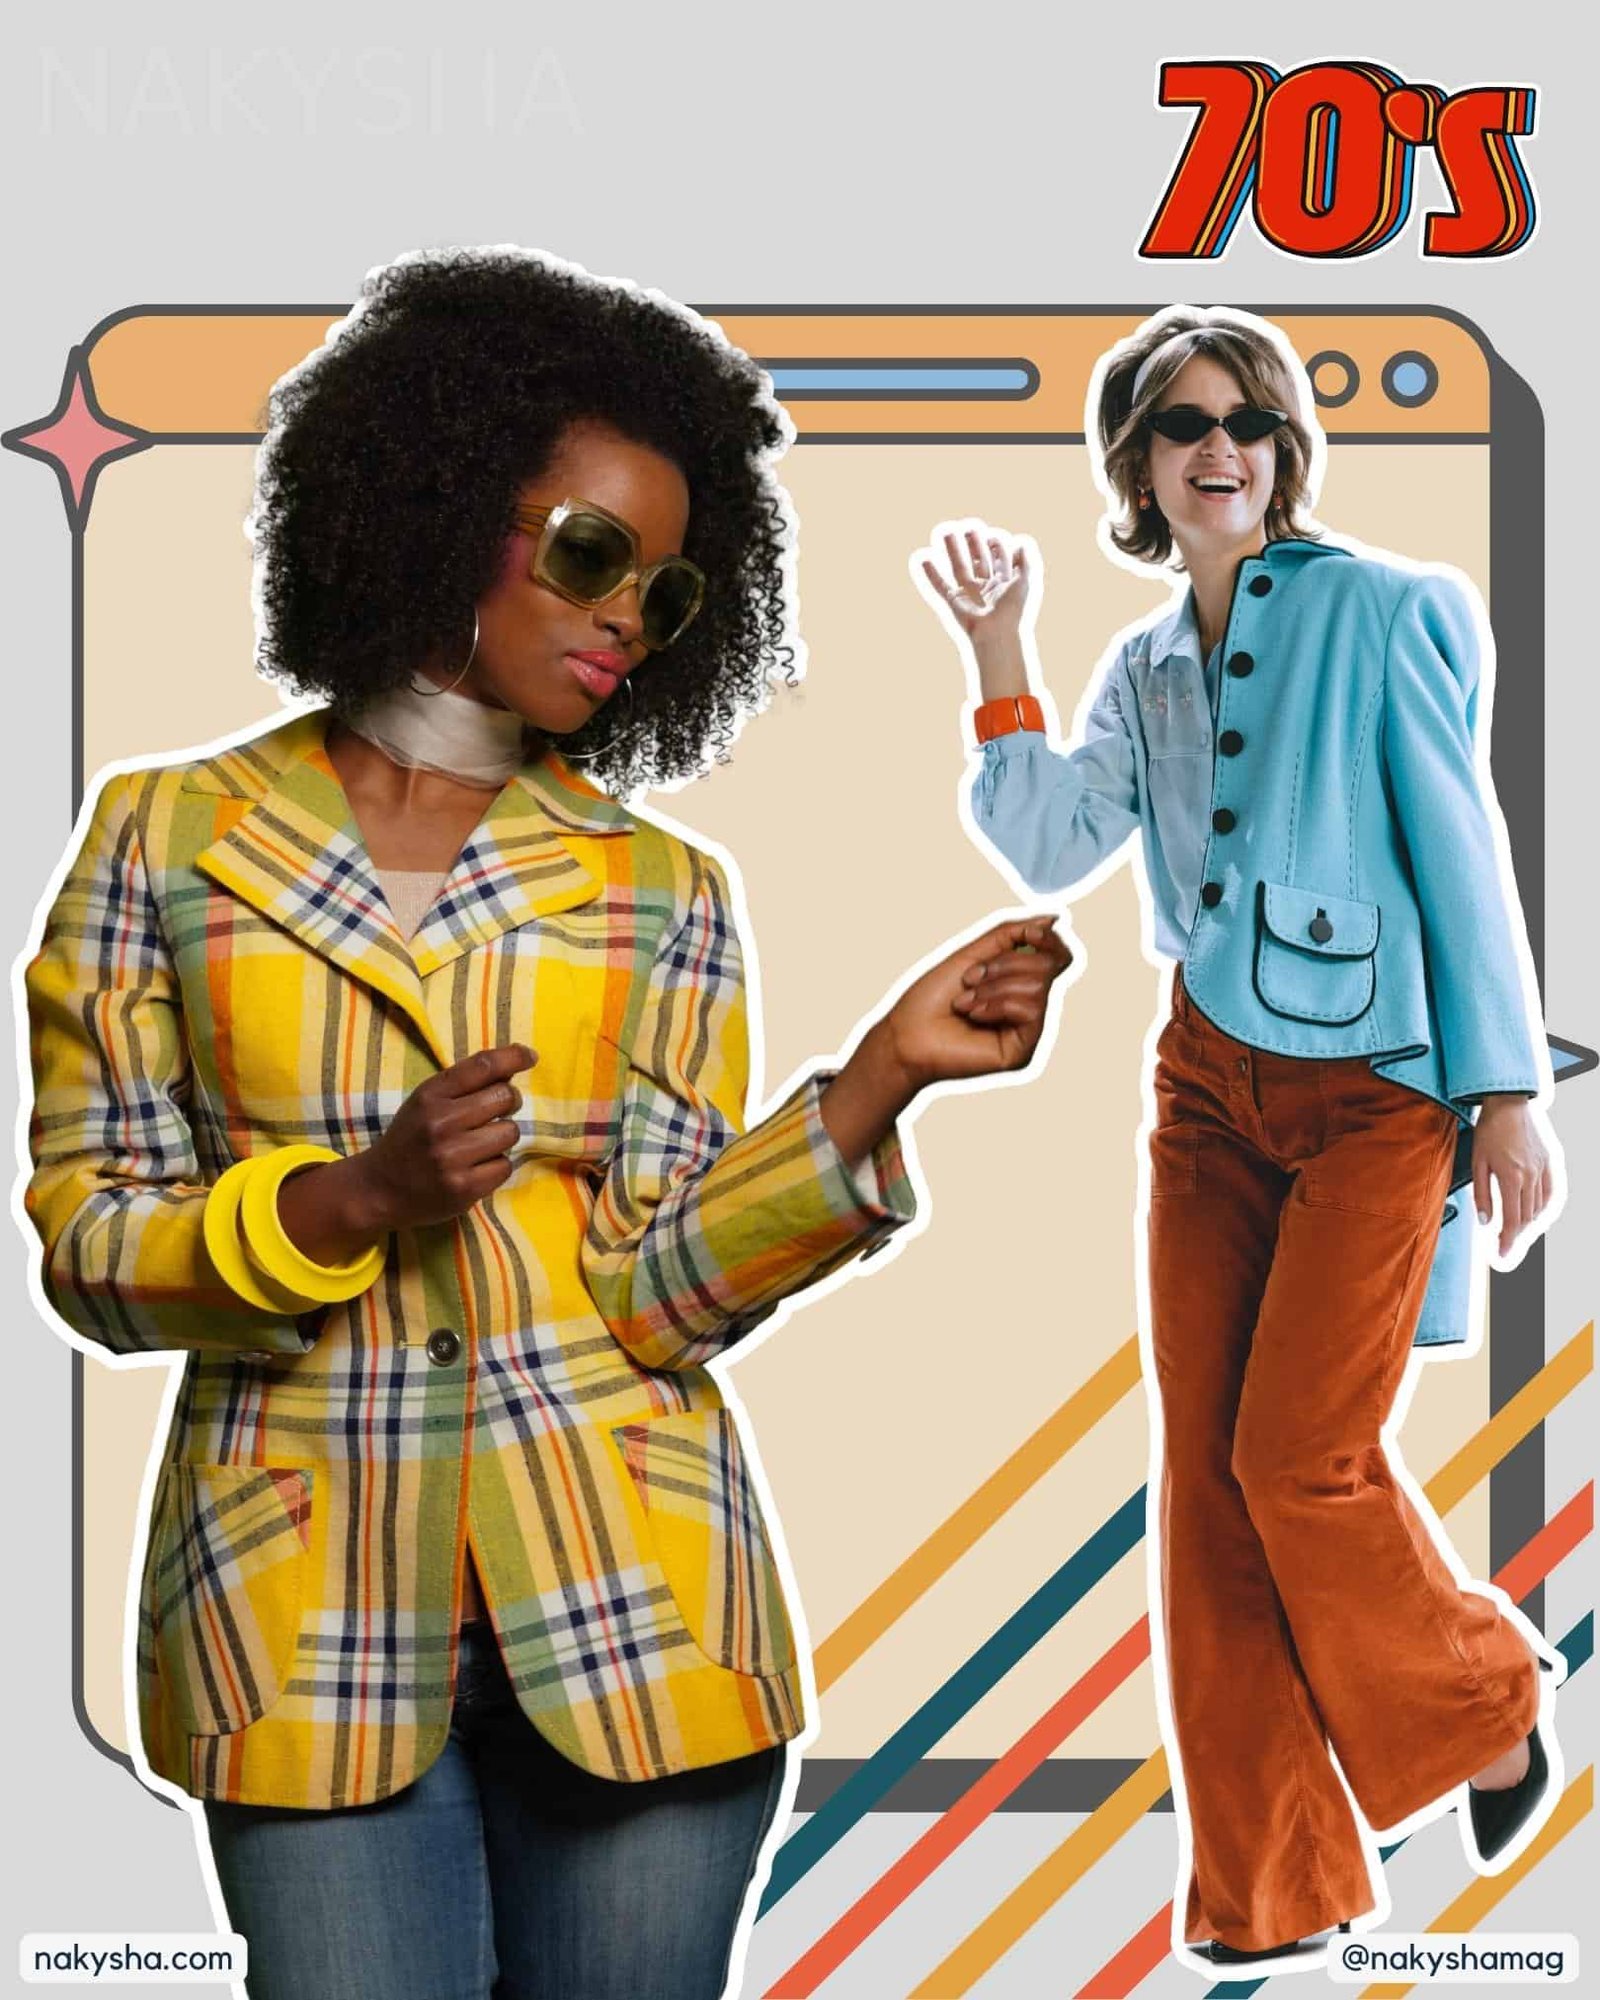 The Definitive 70s Fashion Guide and Outfit Ideas